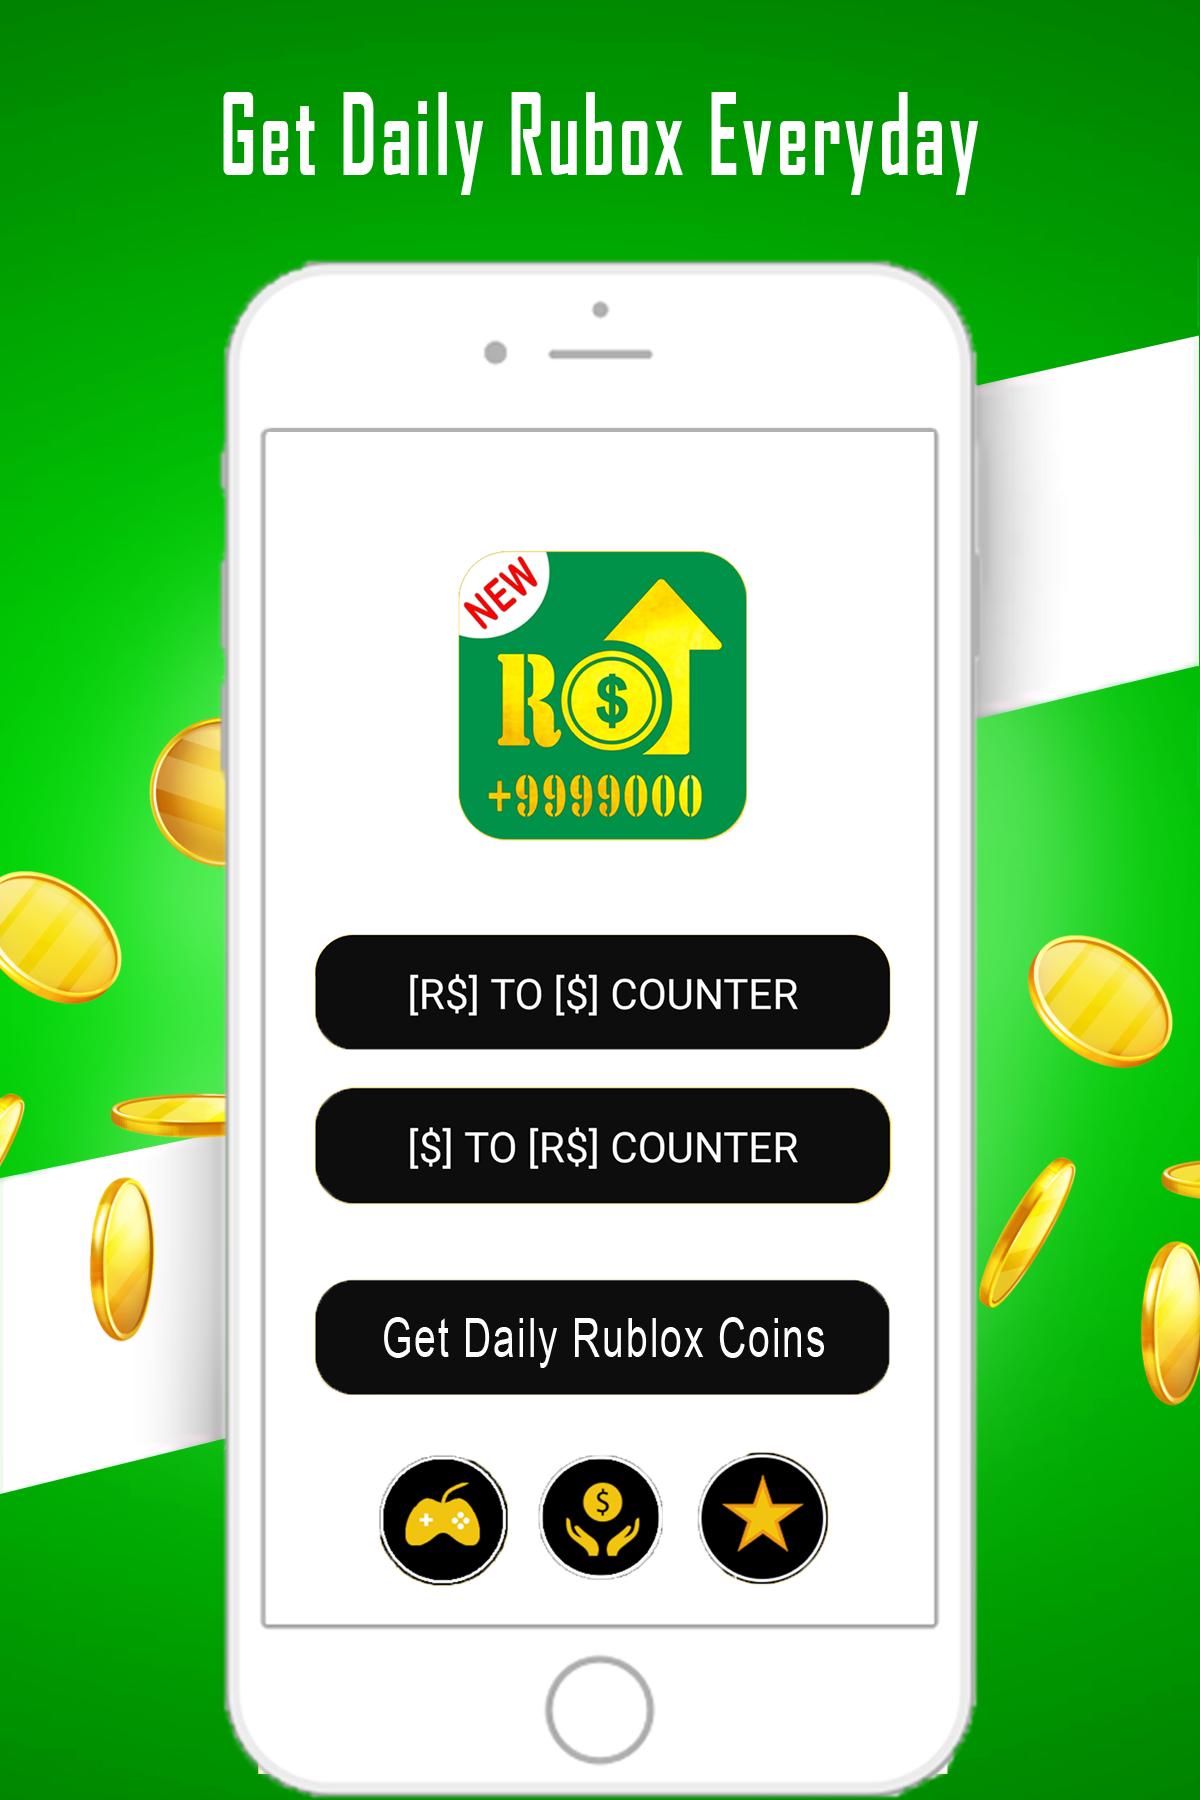 Free Robux Converter Counter To Roblox For Android Apk Download - download free robux counter for roblox 2019 apk latest